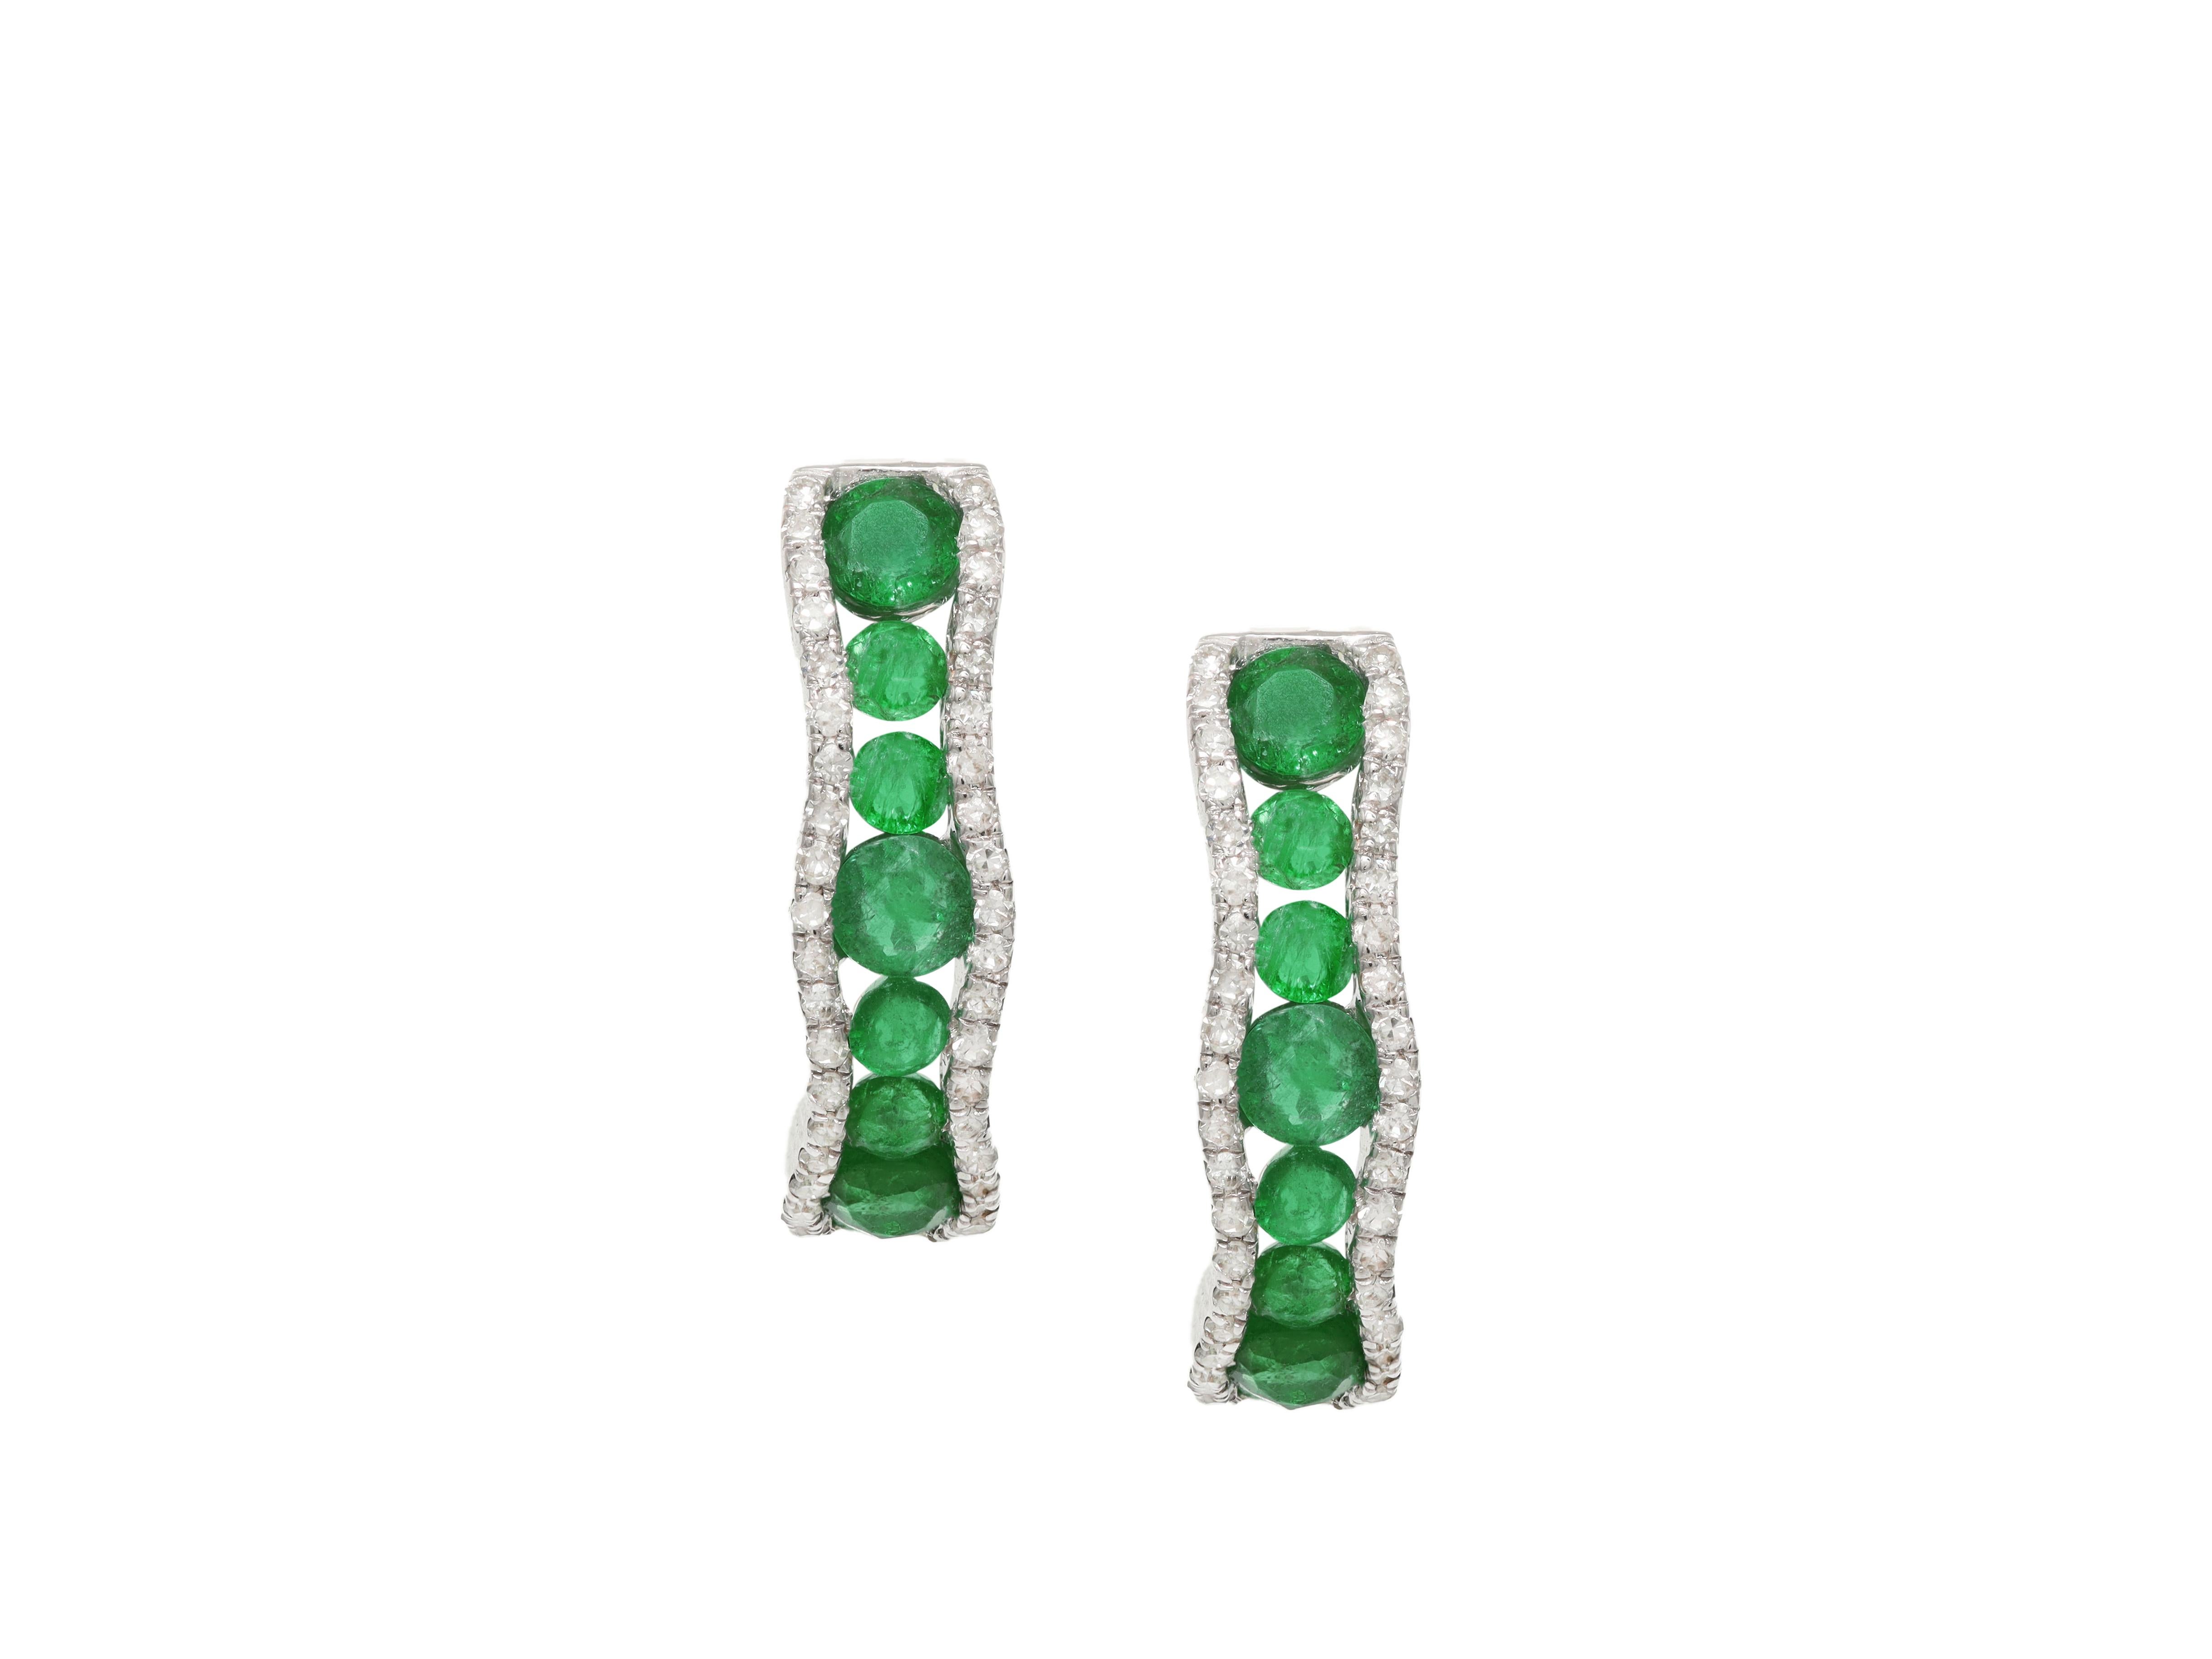 14K White Gold Emerald and Diamond Earrings featuring 1.05 Carat T.W. of Natural Green Emeralds and 0.24 Carats T.W. of Diamonds

Underline your look with this sharp 14K White Gold Diamond and Emerald Earrings. High quality Diamonds and emeralds.